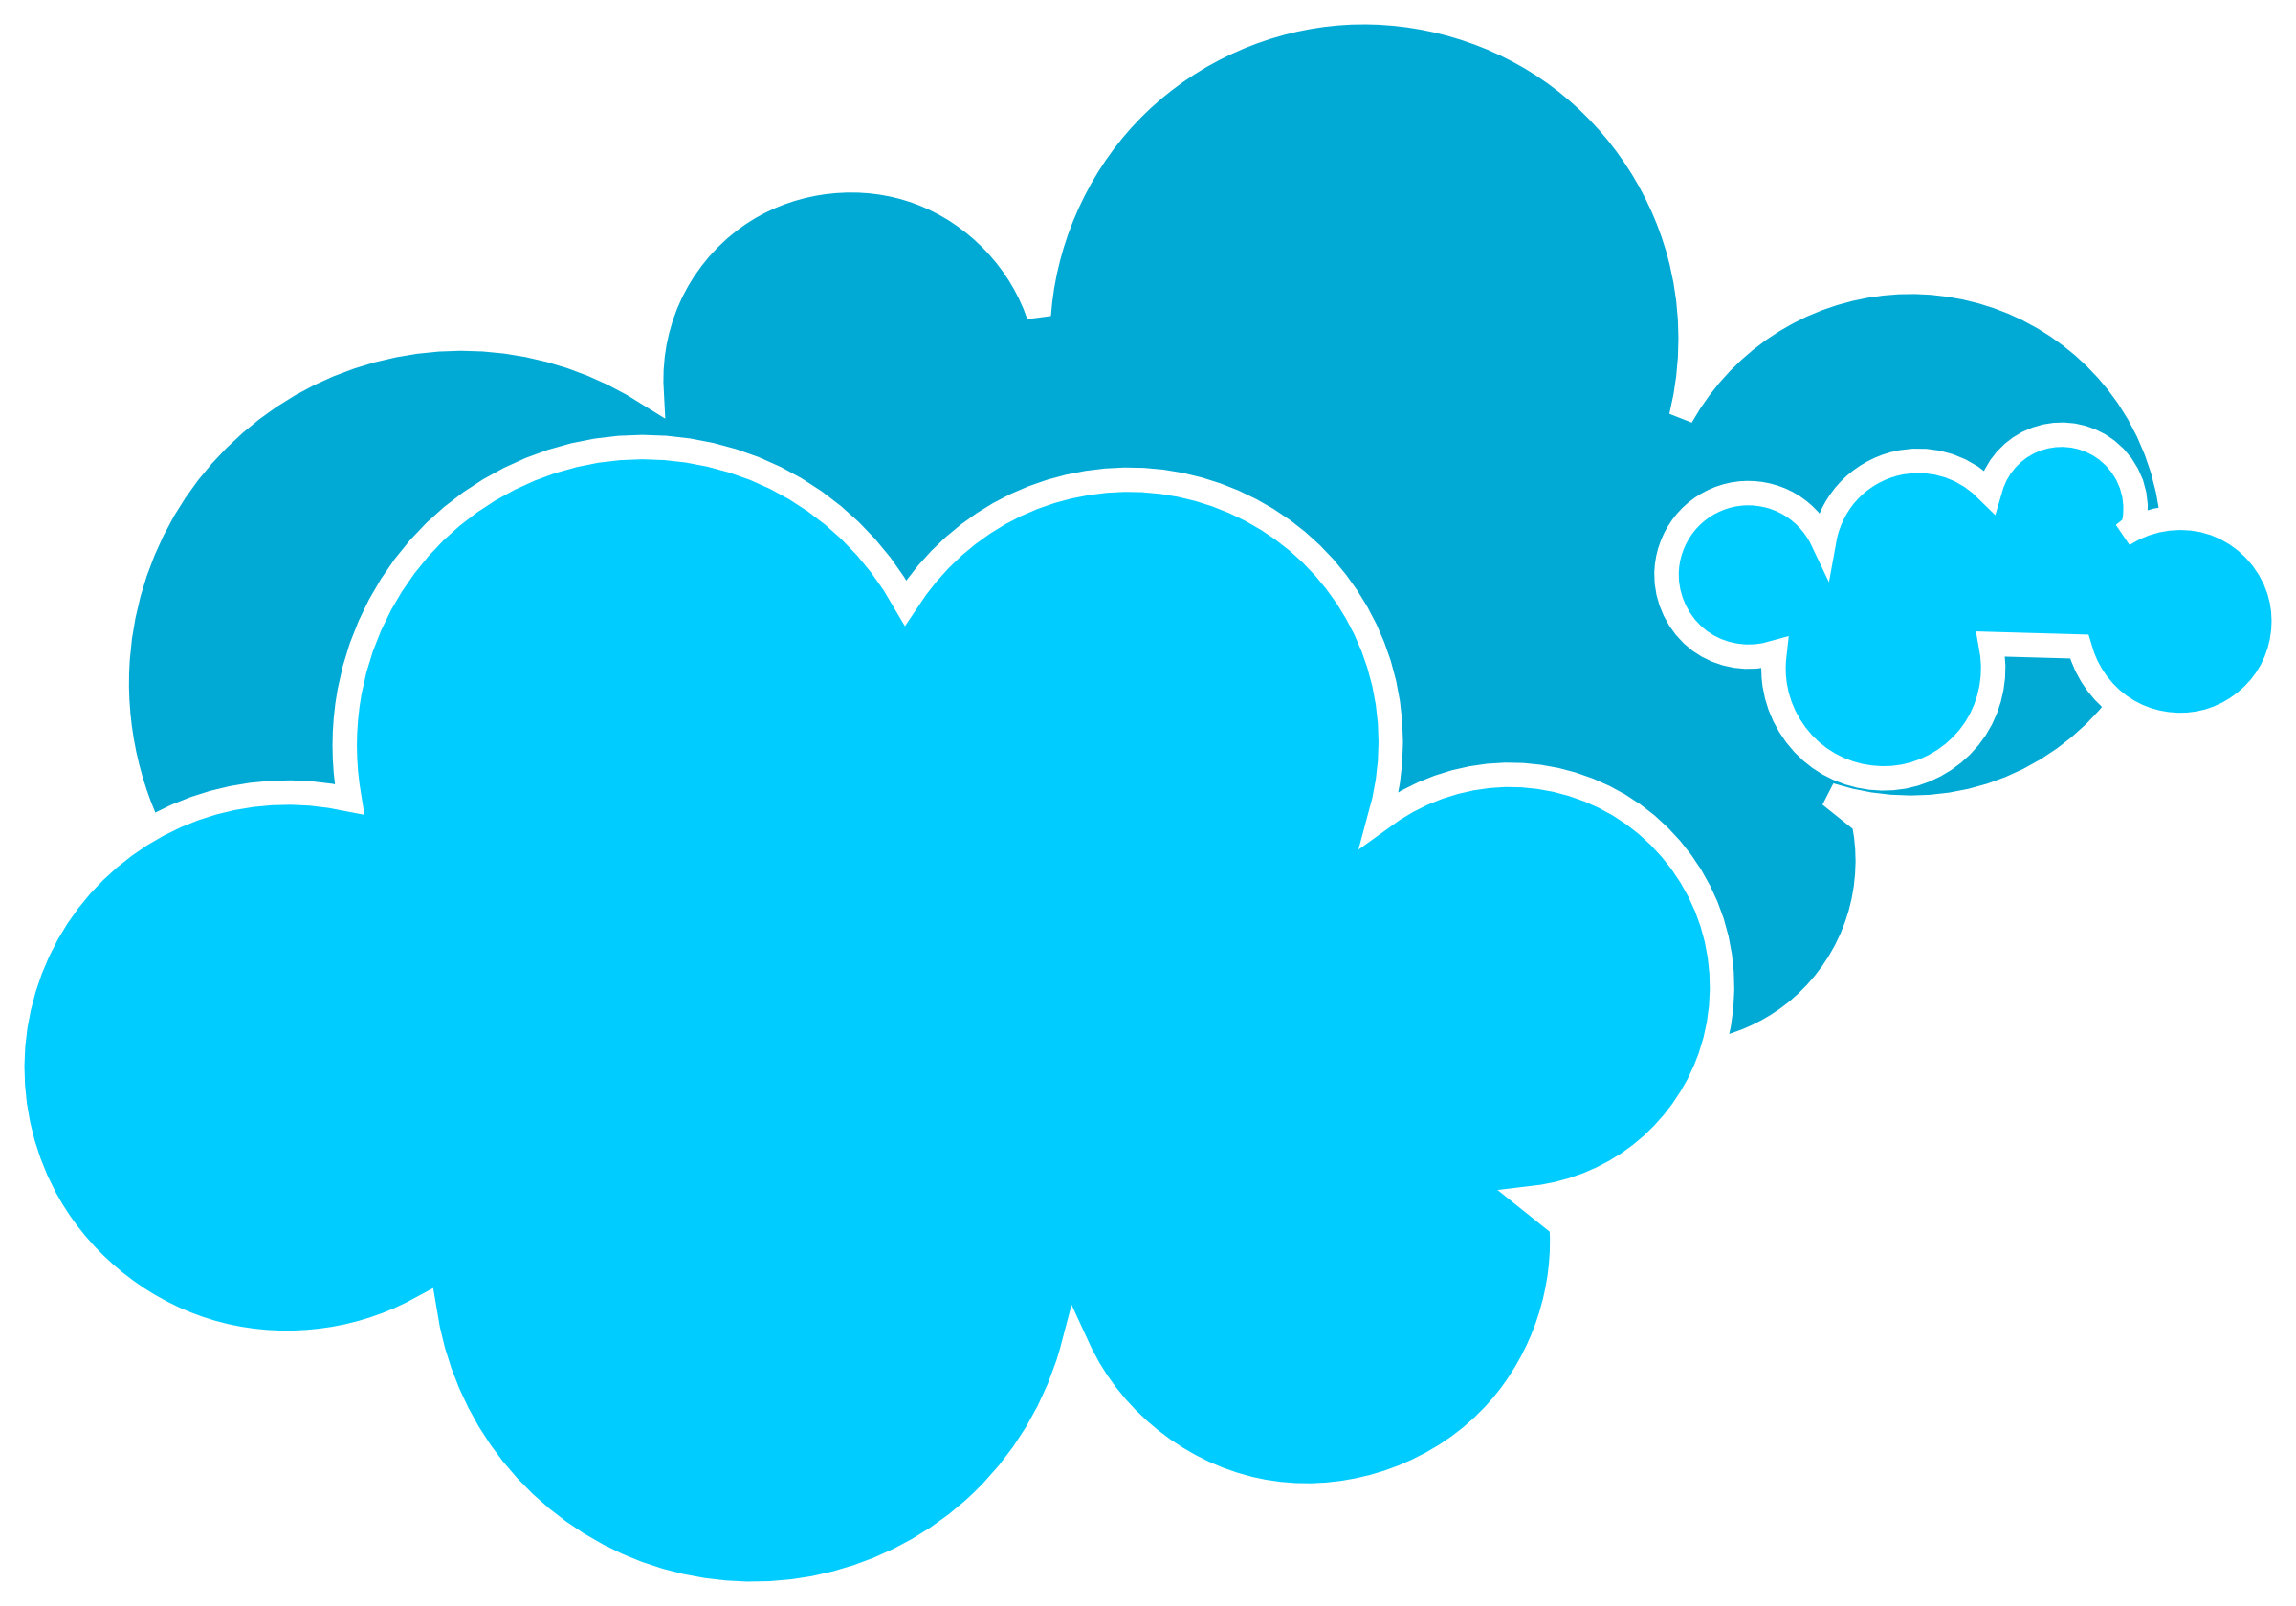 Pin by Cloud Clipart on Cloud Clipart in